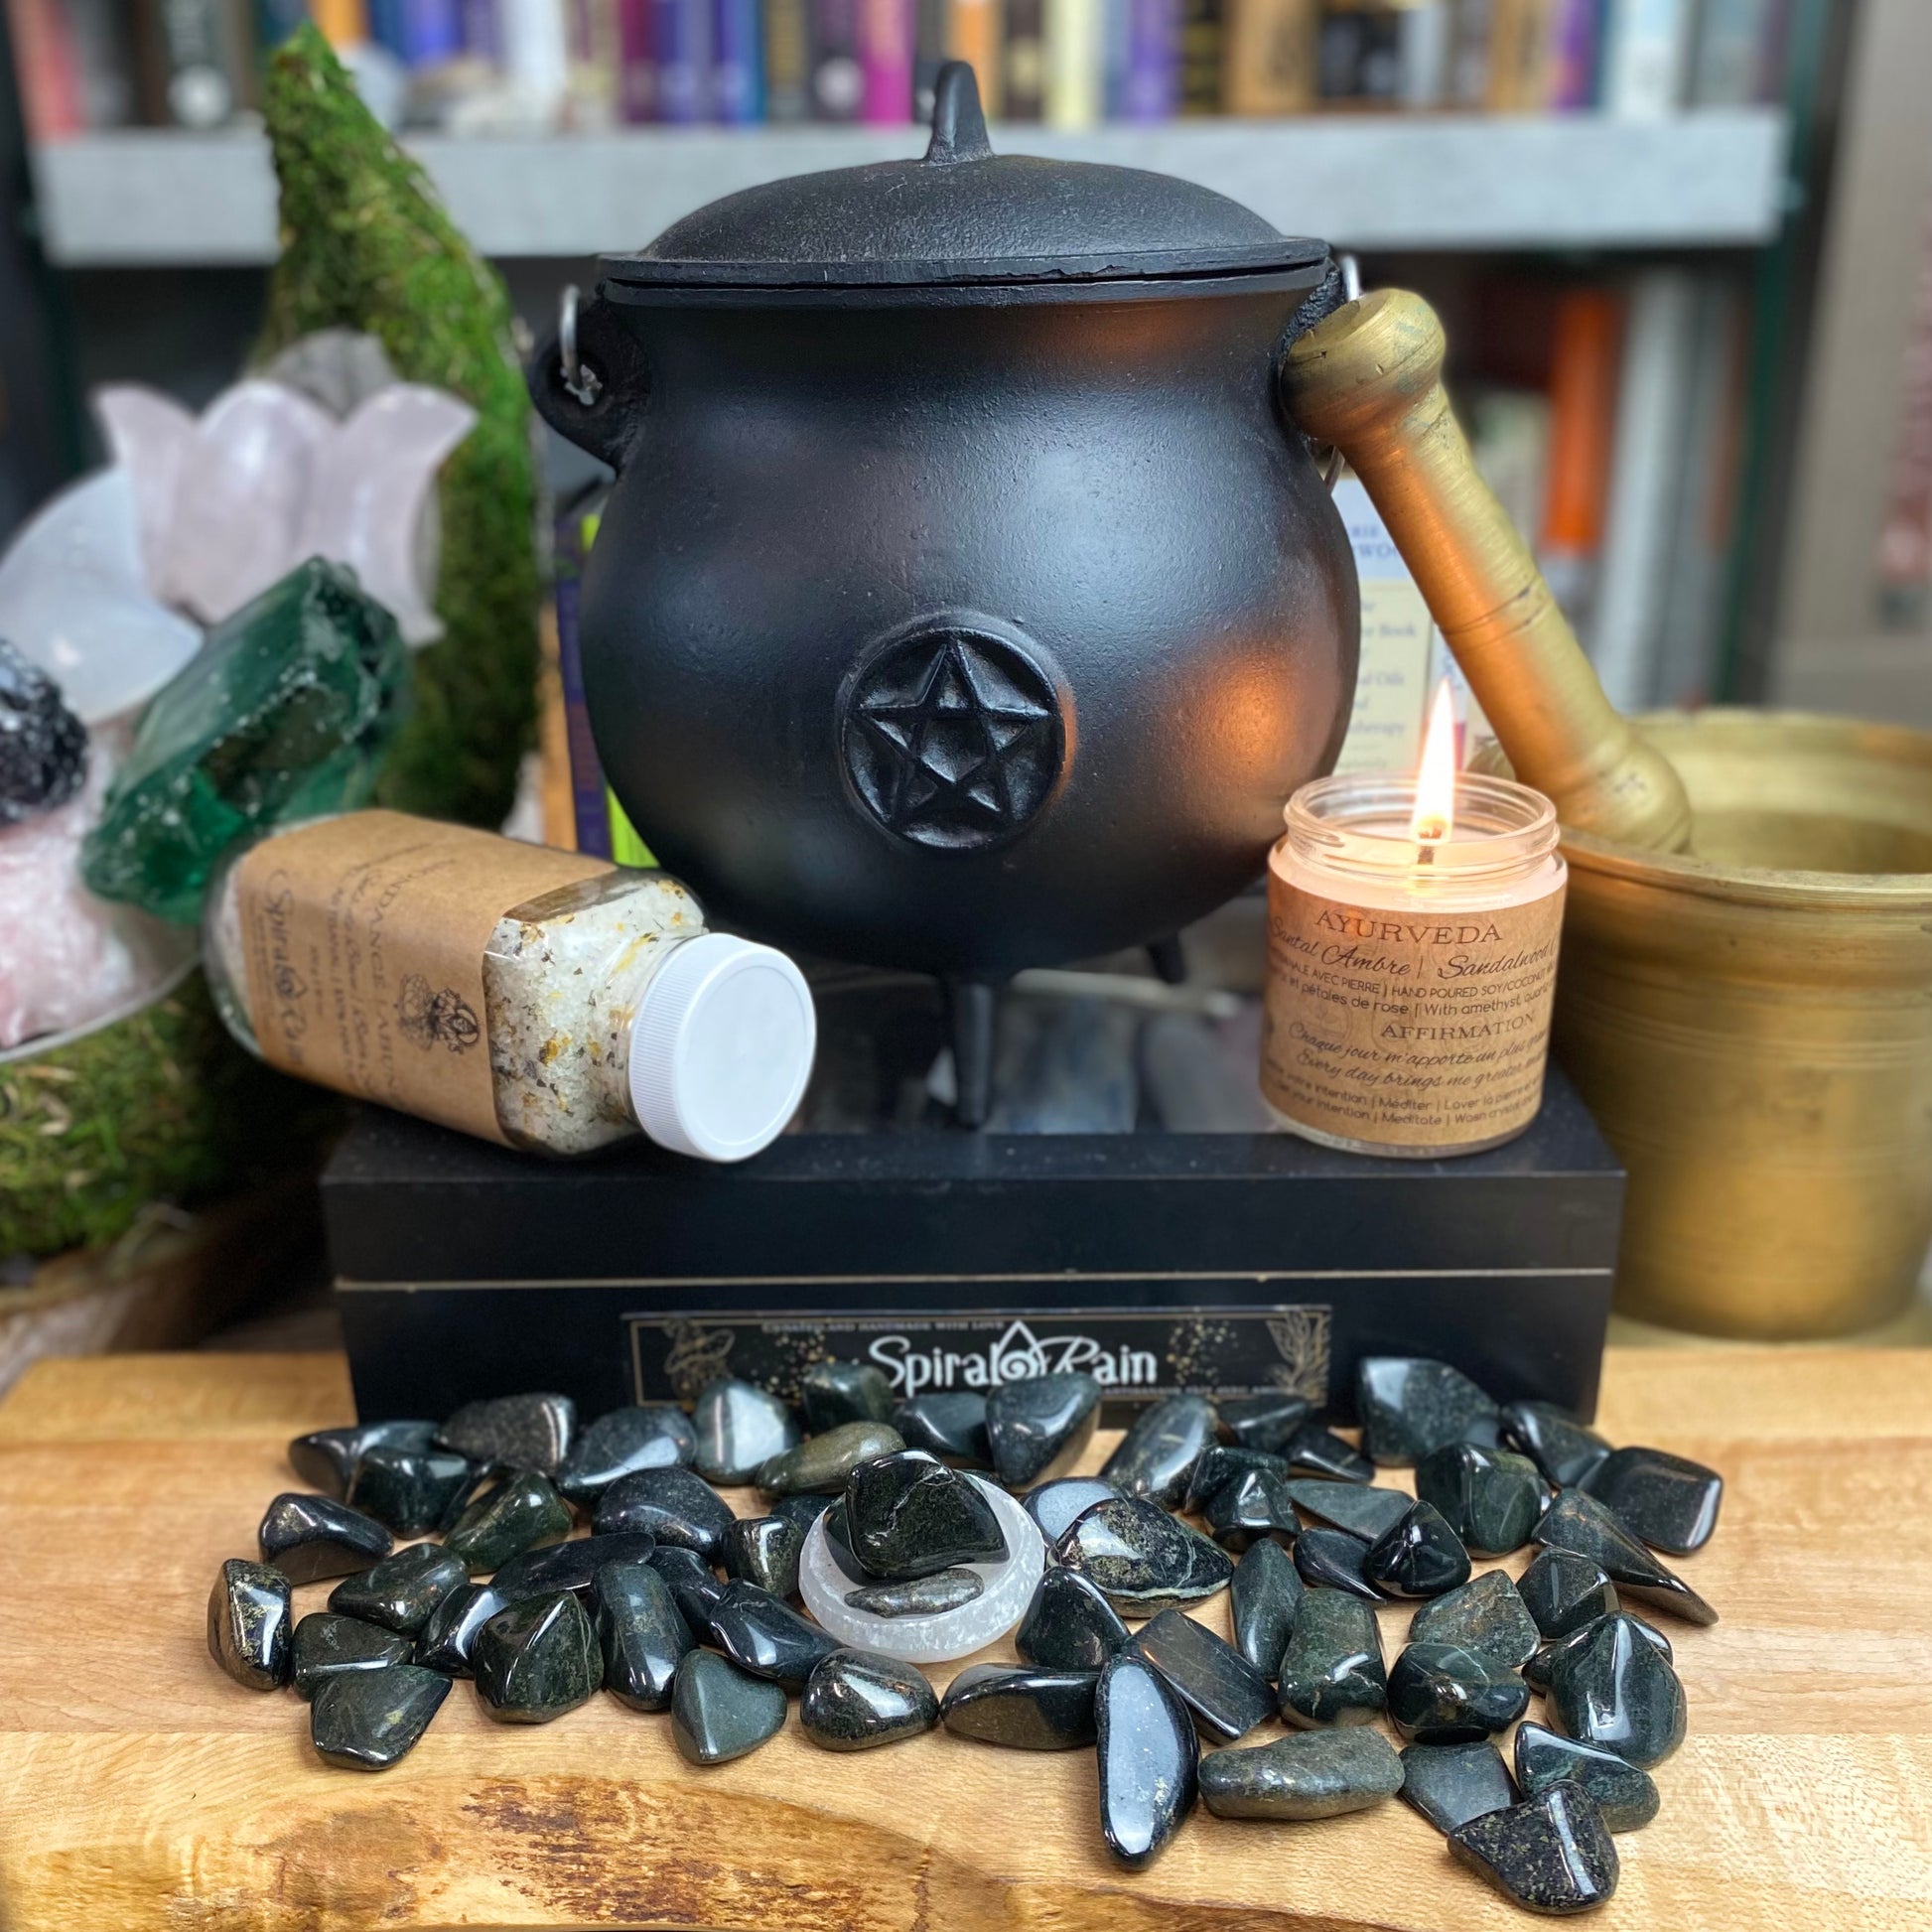 Jade Black Tumbled at $4 only from Spiral Rain